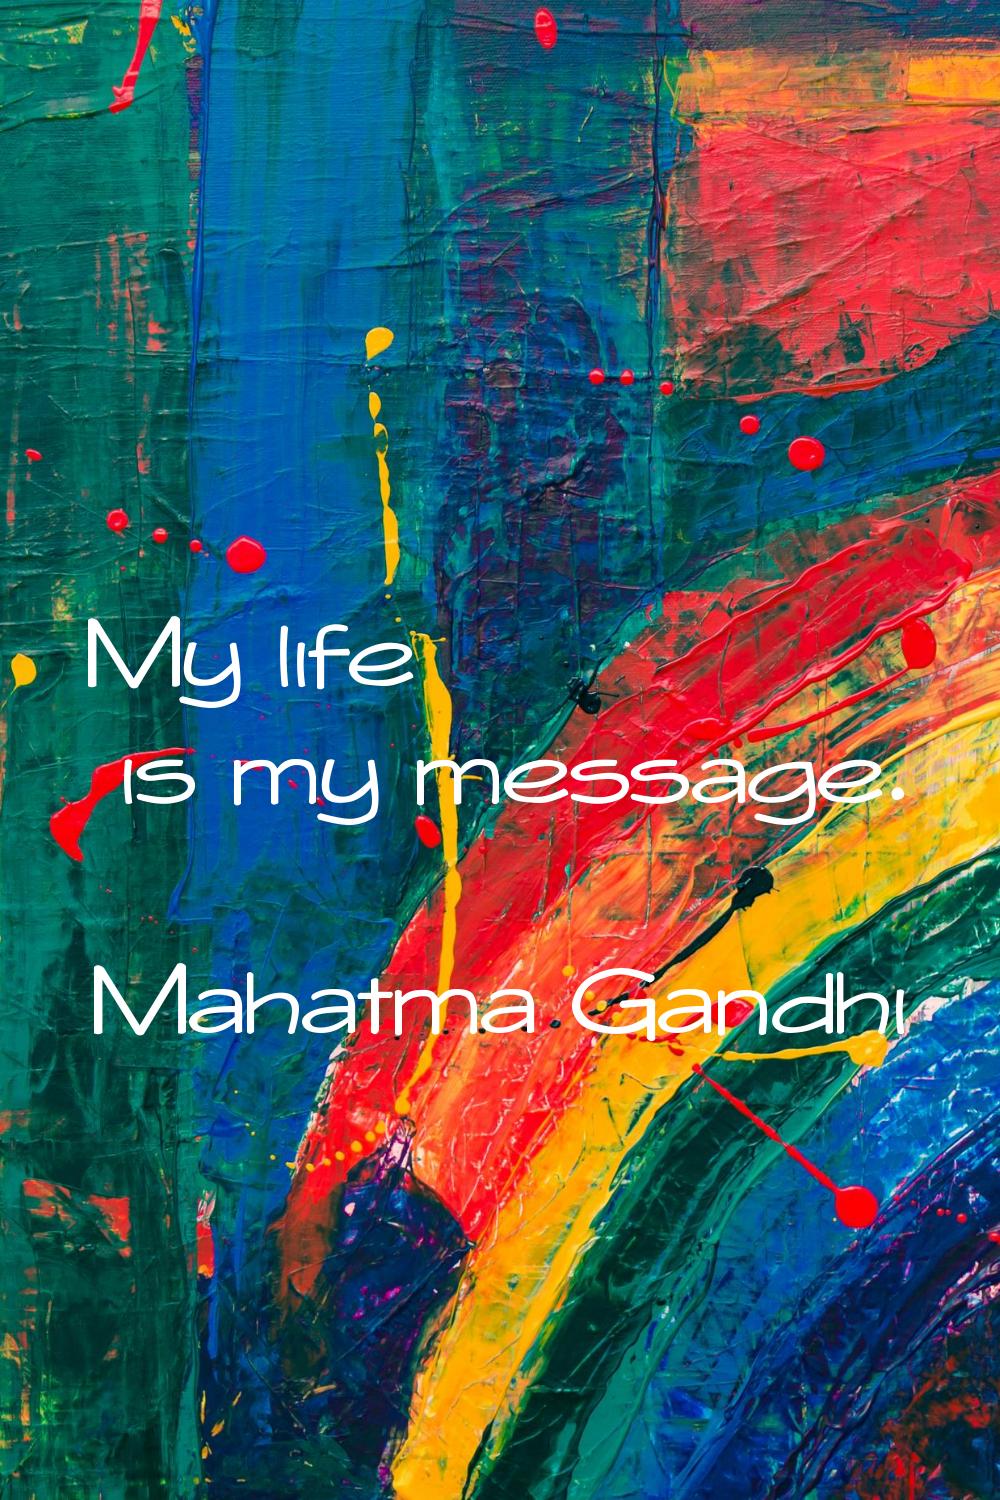 My life is my message.